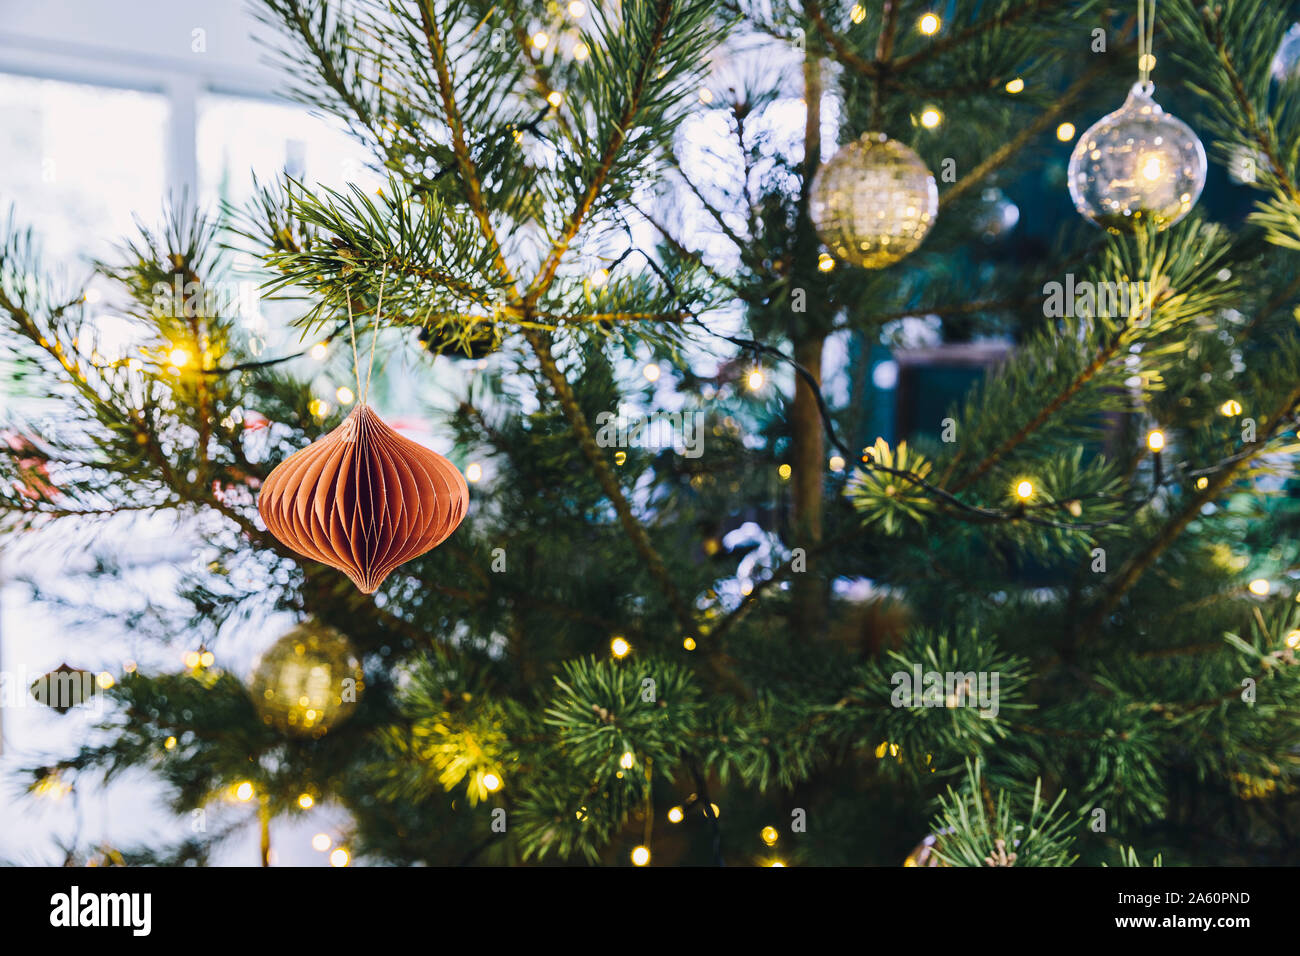 Closeup of decorated pine Christmas tree in living room Stock Photo